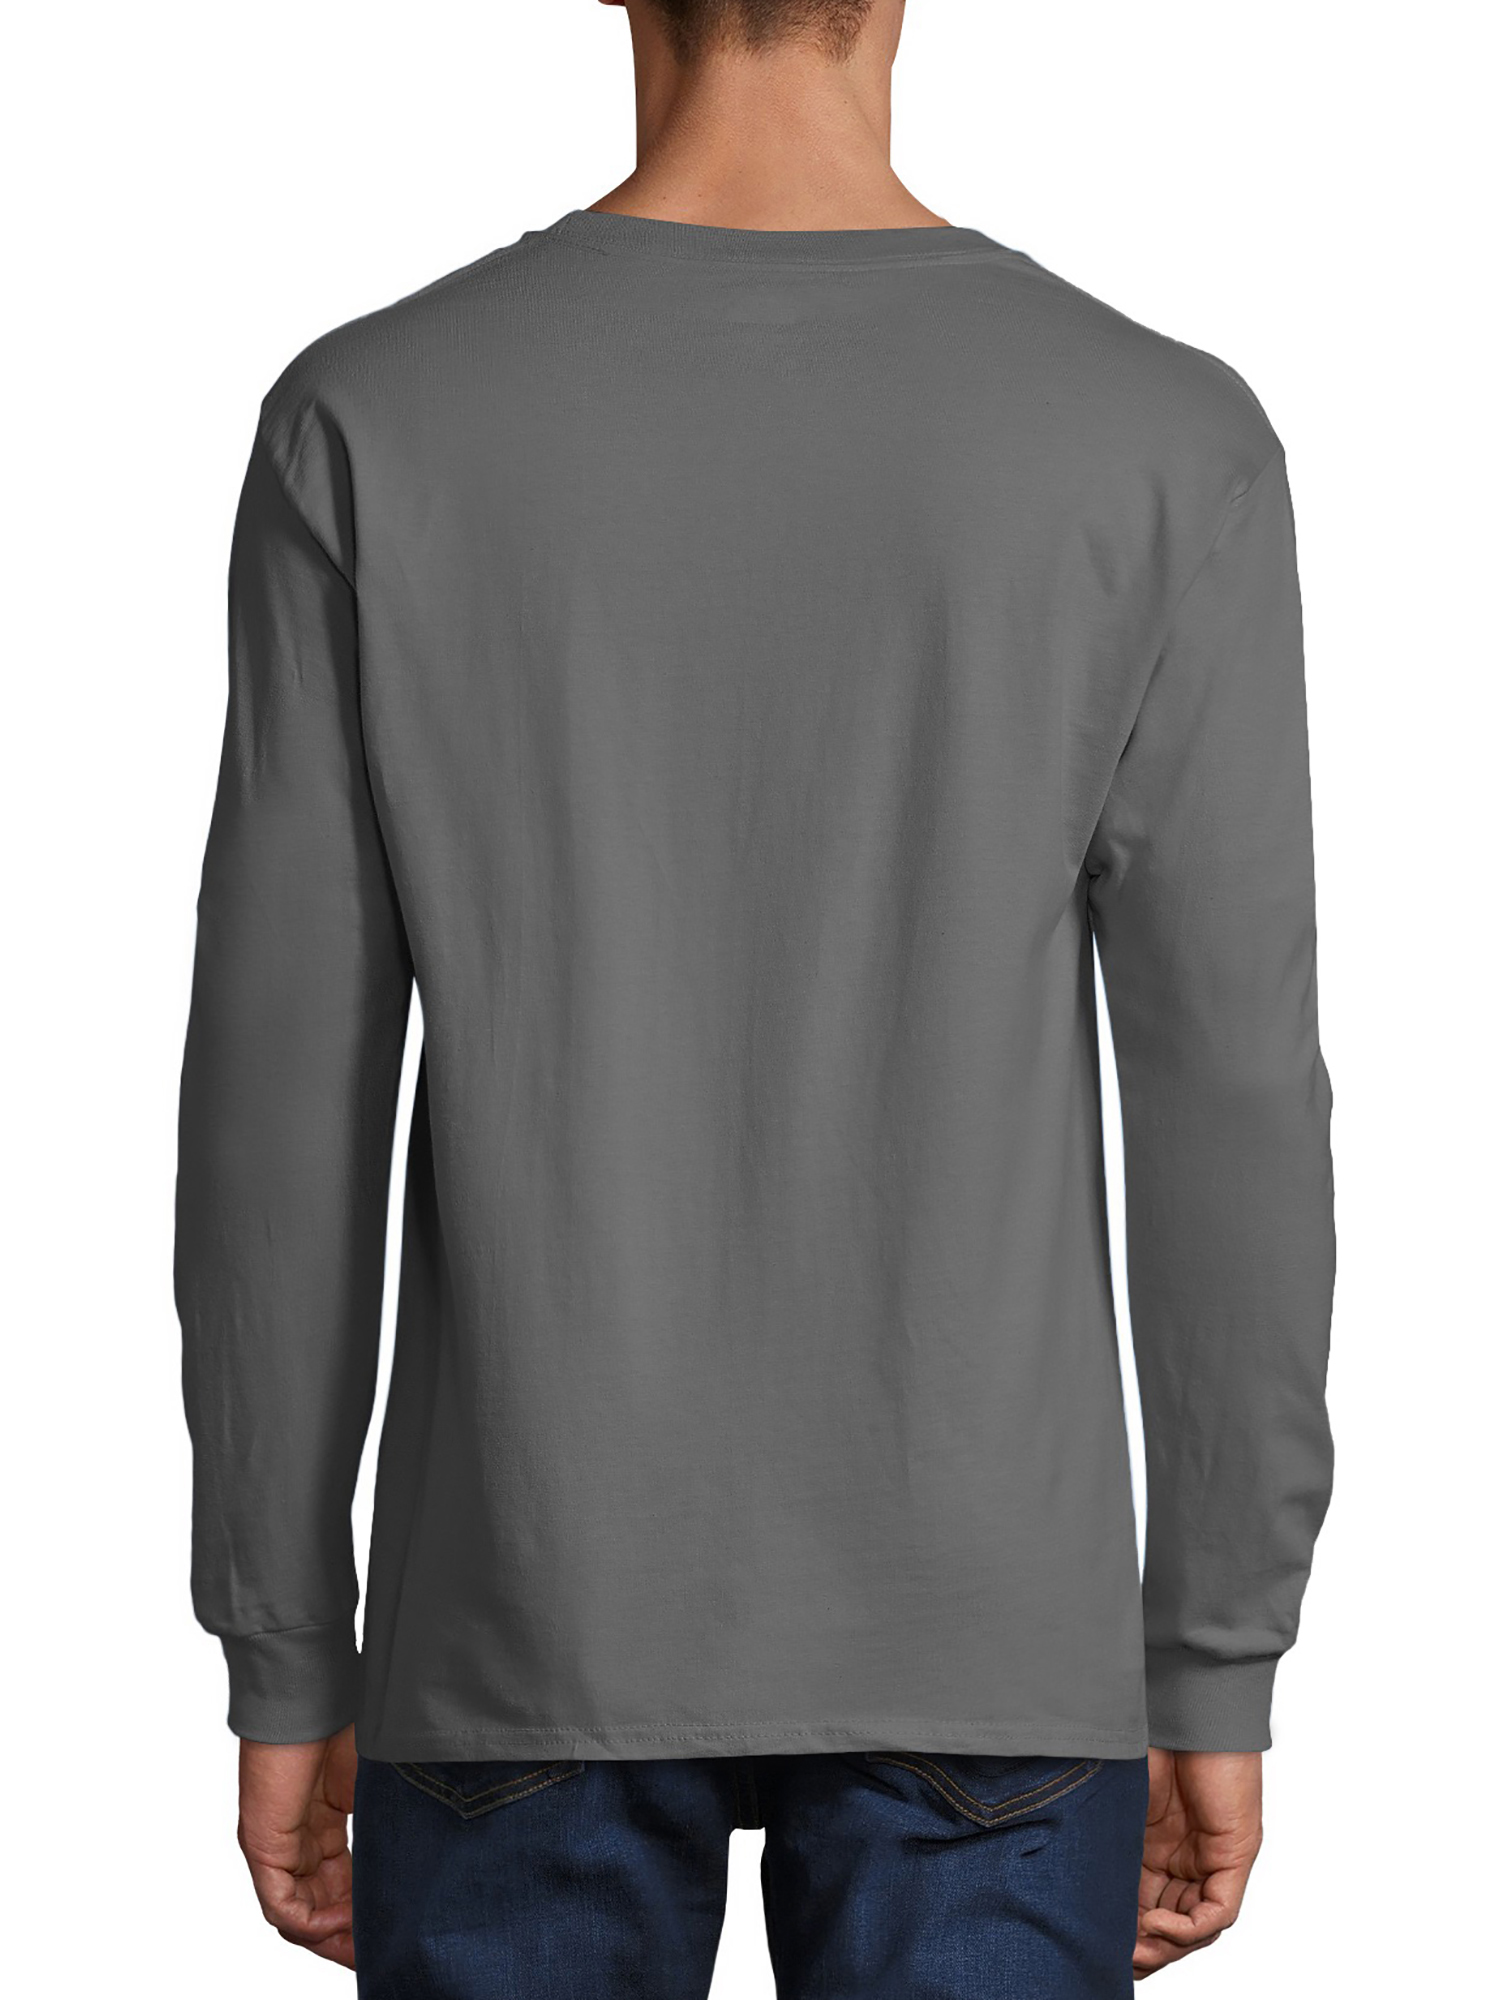 Hanes Men's and Big Men's Premium Beefy-T Long Sleeve T-Shirt, Up To 3XL - image 4 of 6